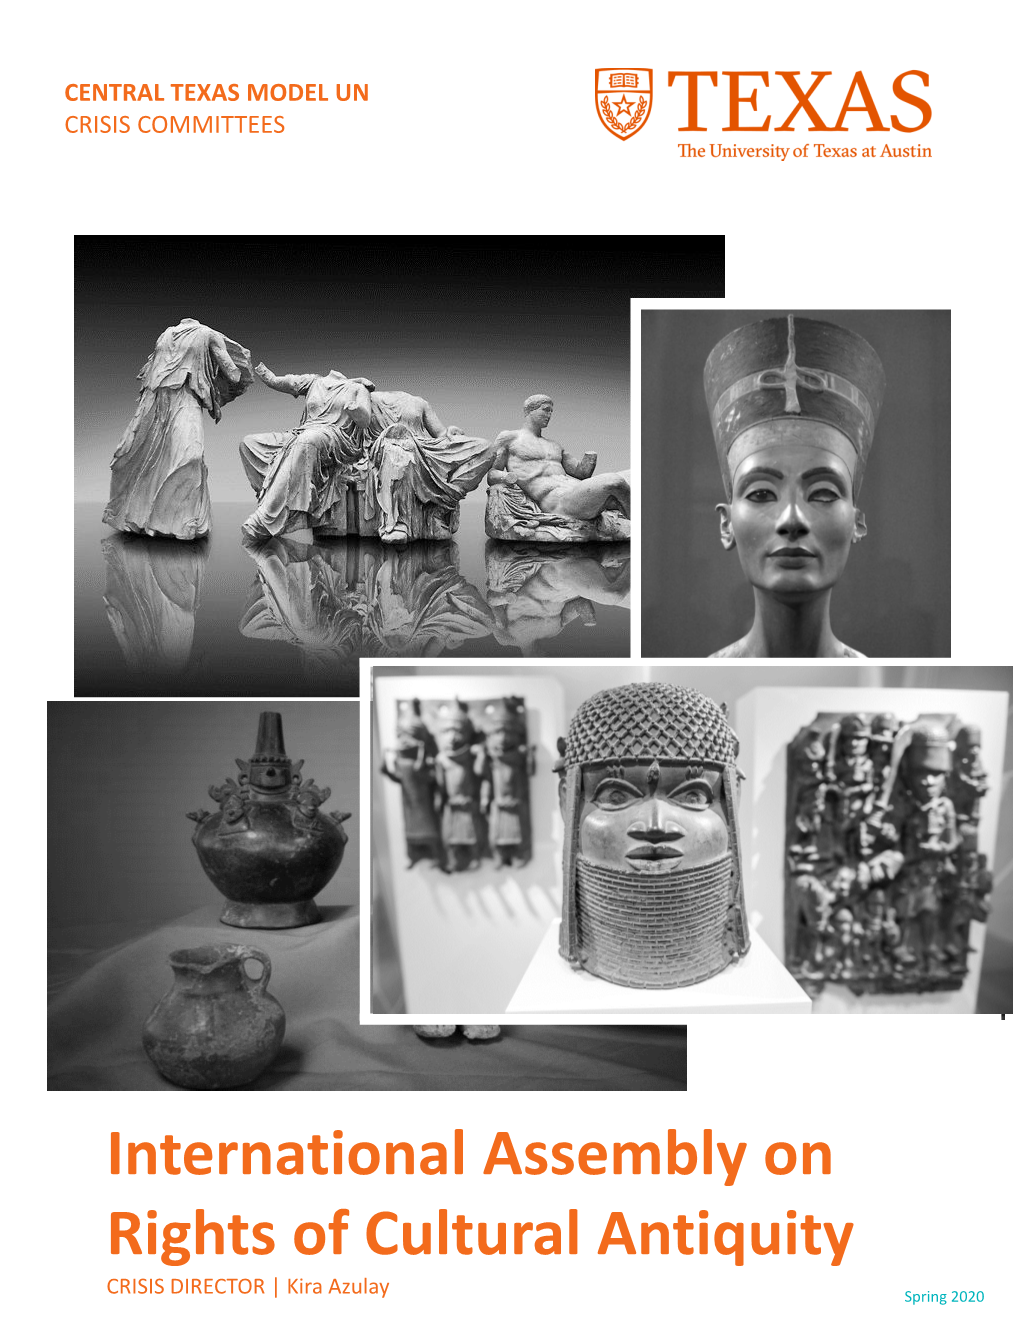 International Assembly on Rights of Cultural Antiquity